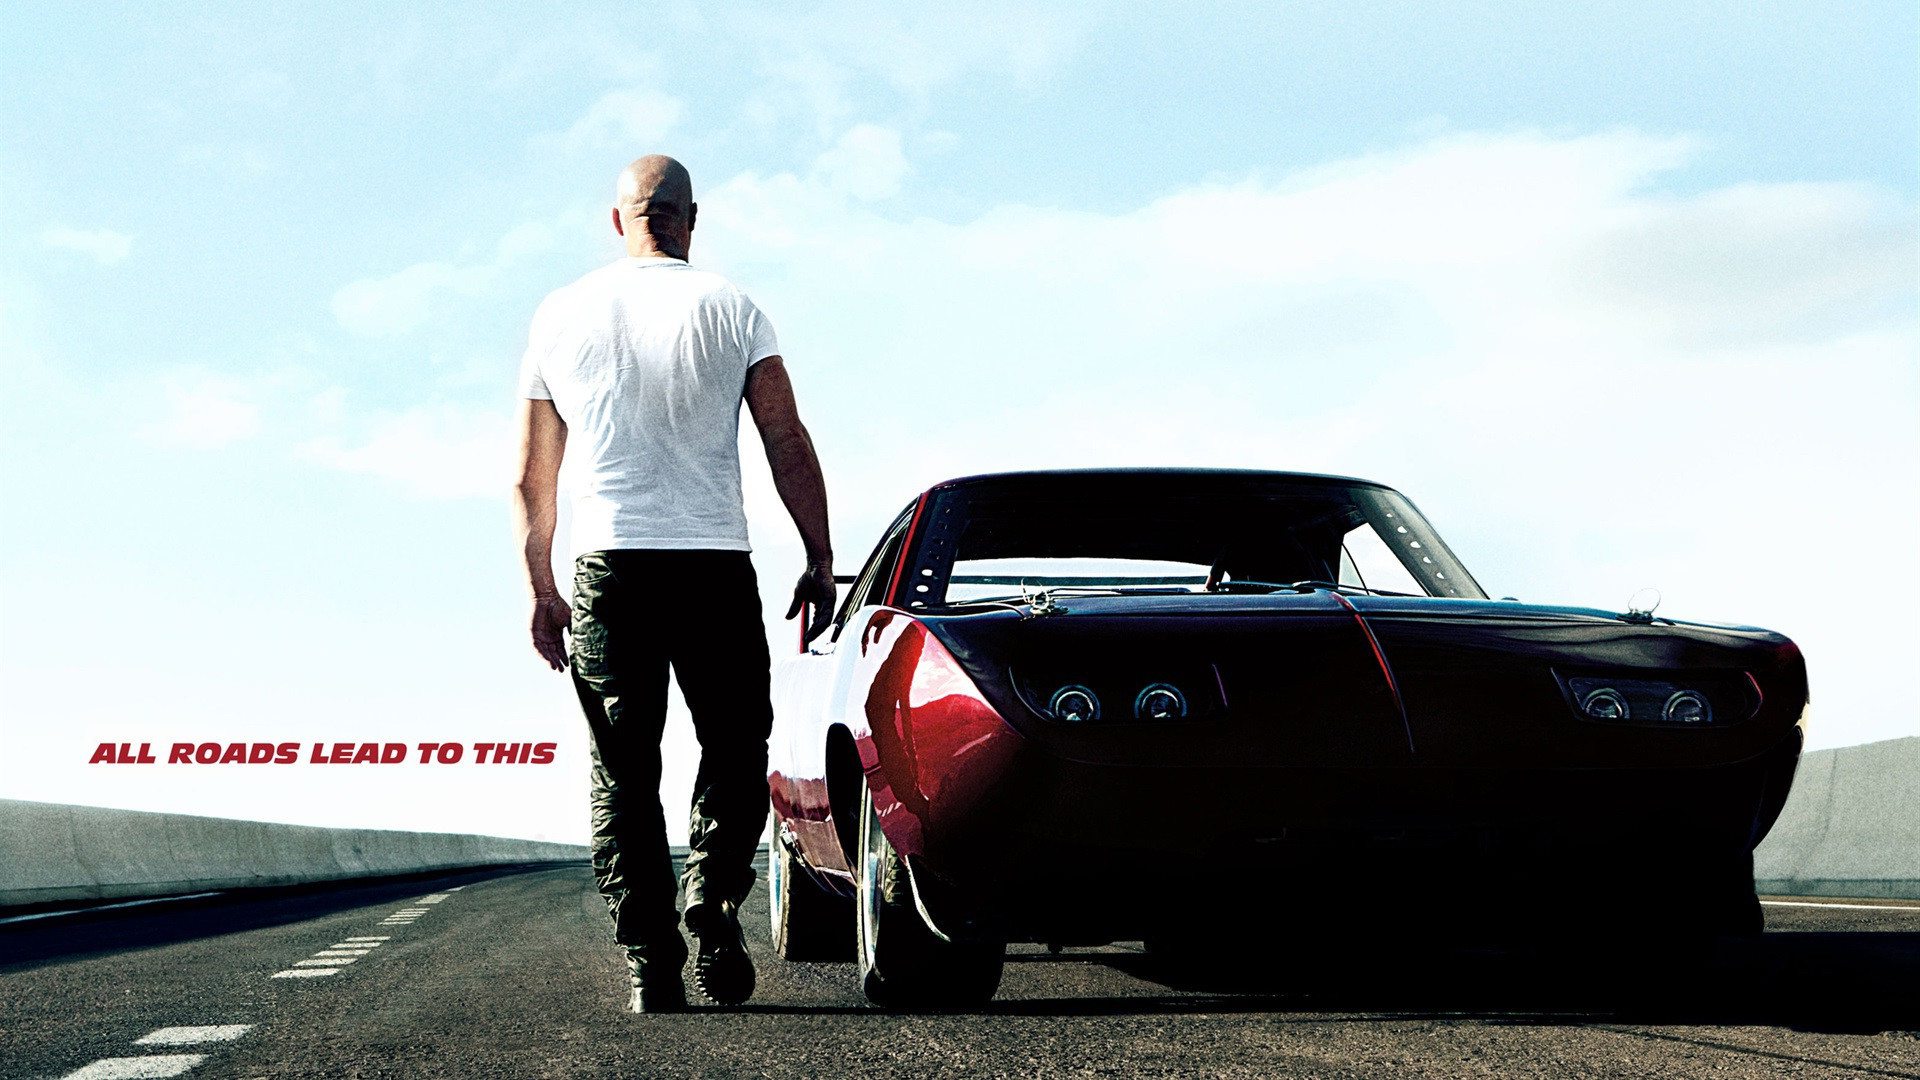 4K Fast And Furious Computer Wallpapers